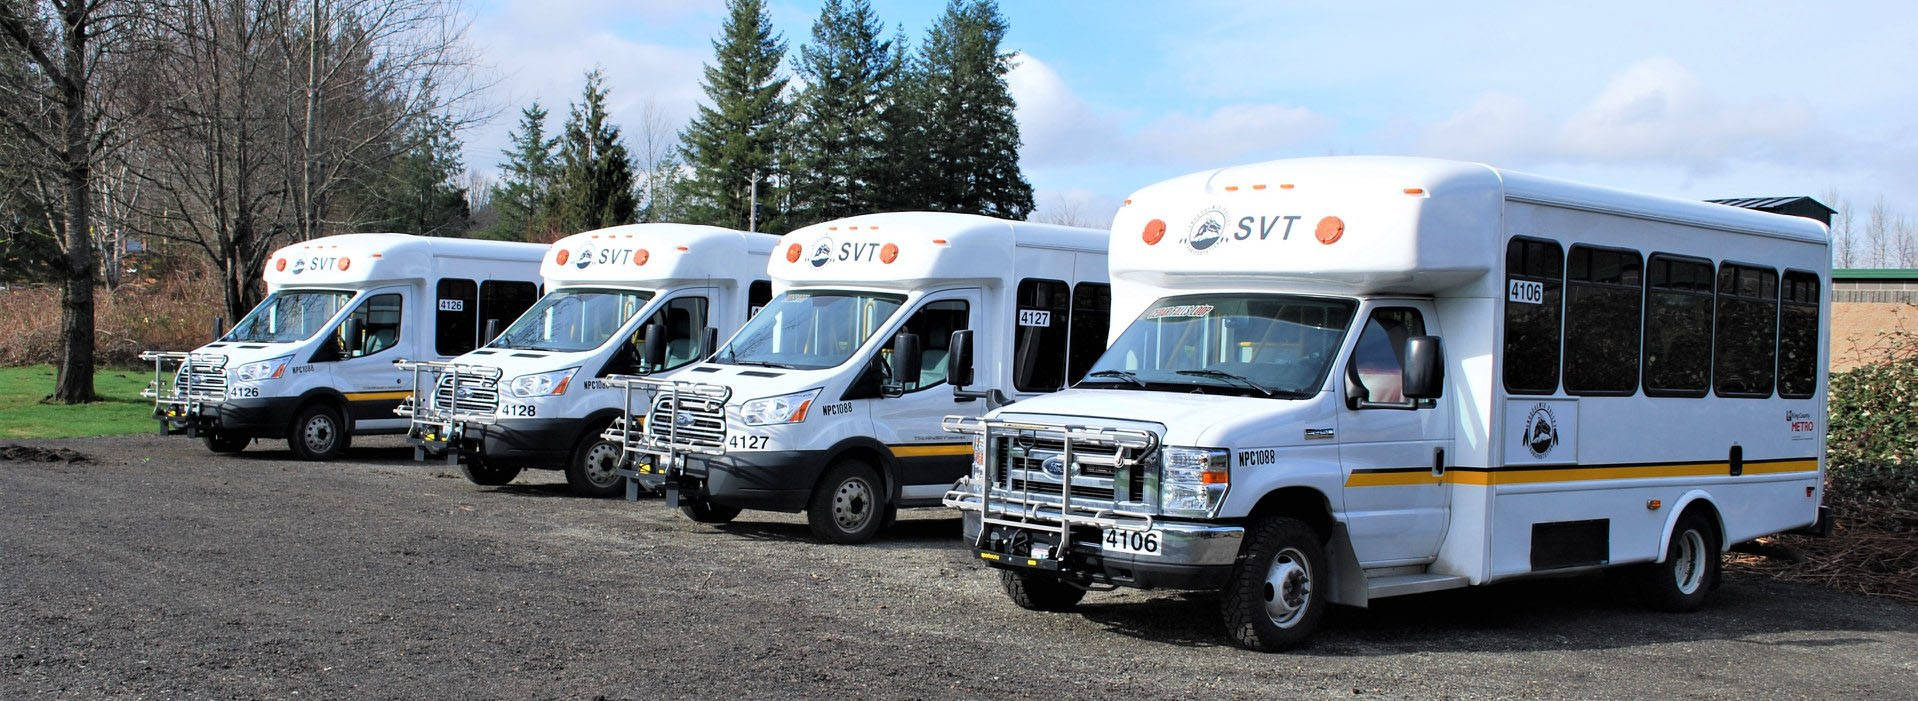 Snoqualmie Valley Transportation buses. Contributed by SVT